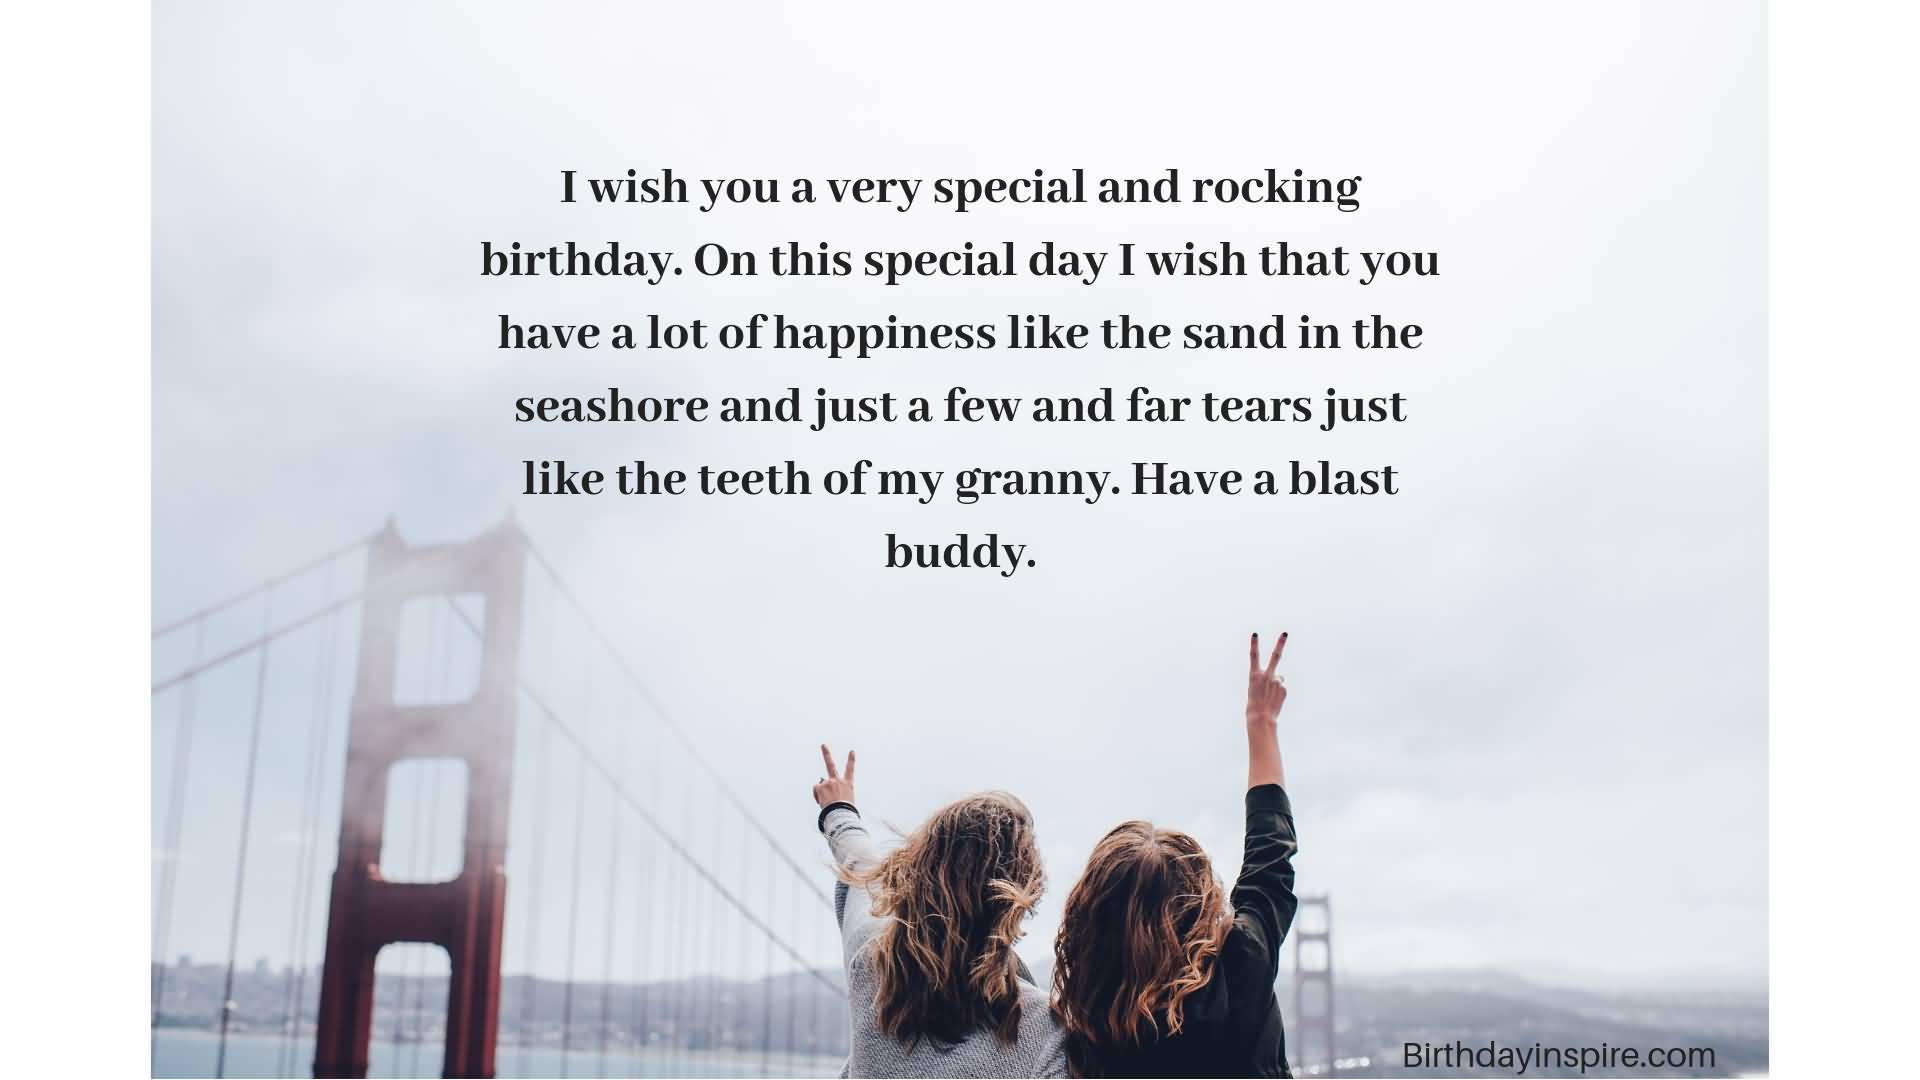 I wish you a very special rocking Happy Birthday buddy great message wishes on this day to you